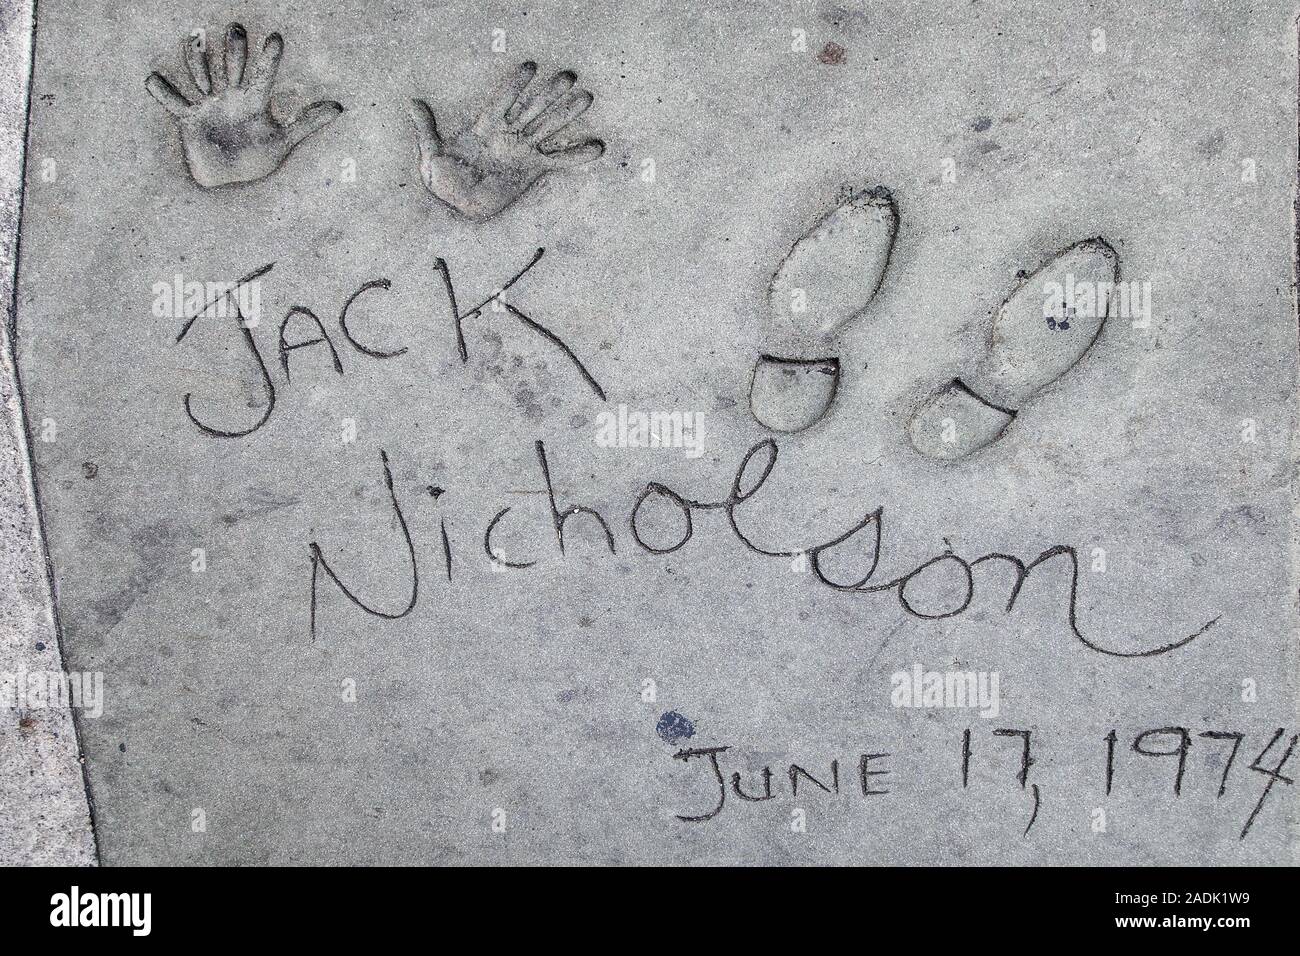 Los Angeles, California - September 06, 2019: Hand and footprints of actor Jack Nicholson in the Grauman's Chinese Theatre forecourt, Hollywood. Stock Photo